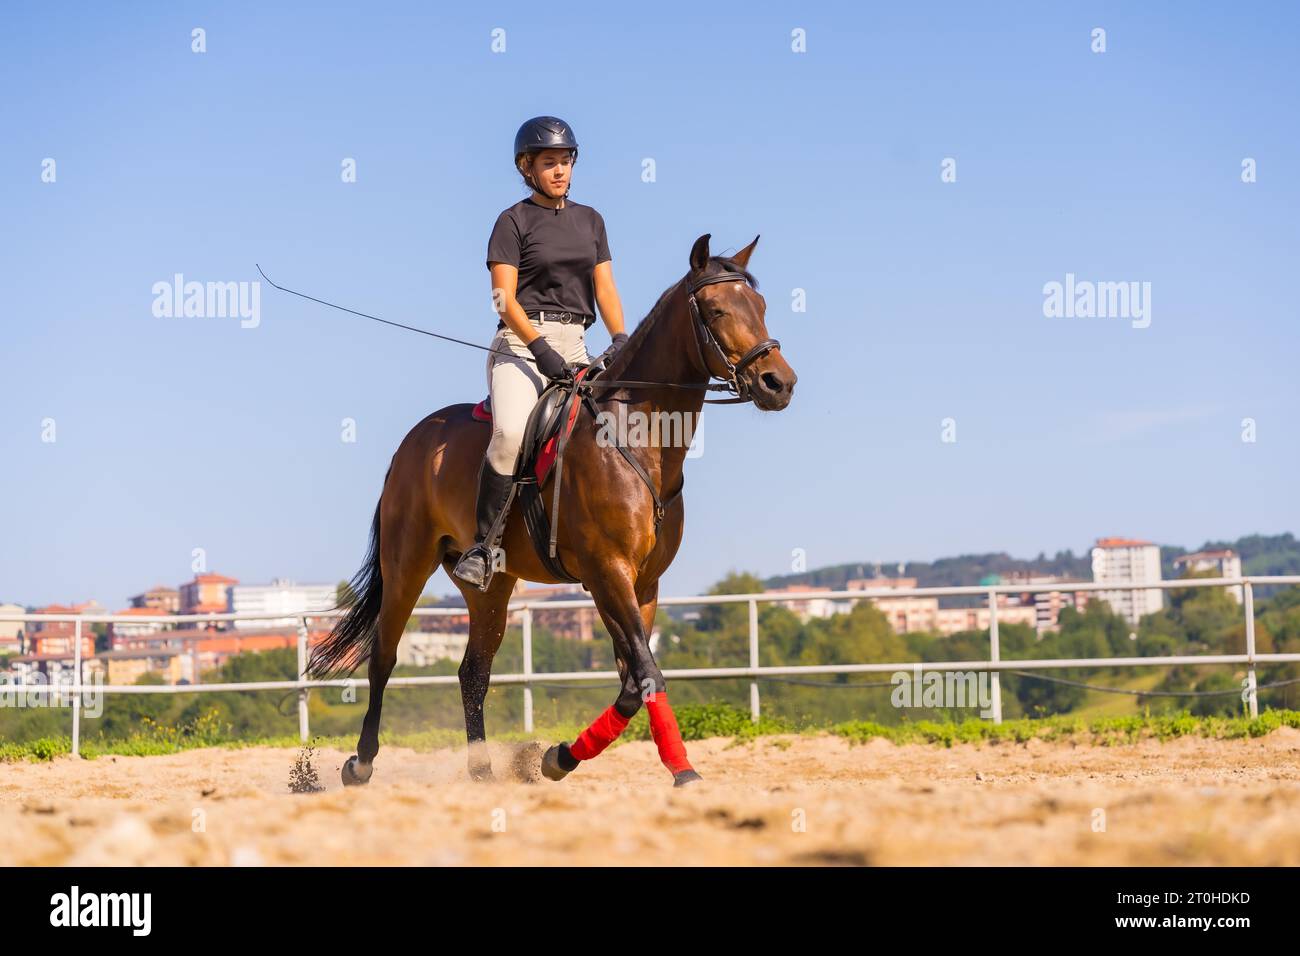 Young Caucasian blonde girl riding on a horse with a brown horse, dressed in black rider with safety cap Stock Photo